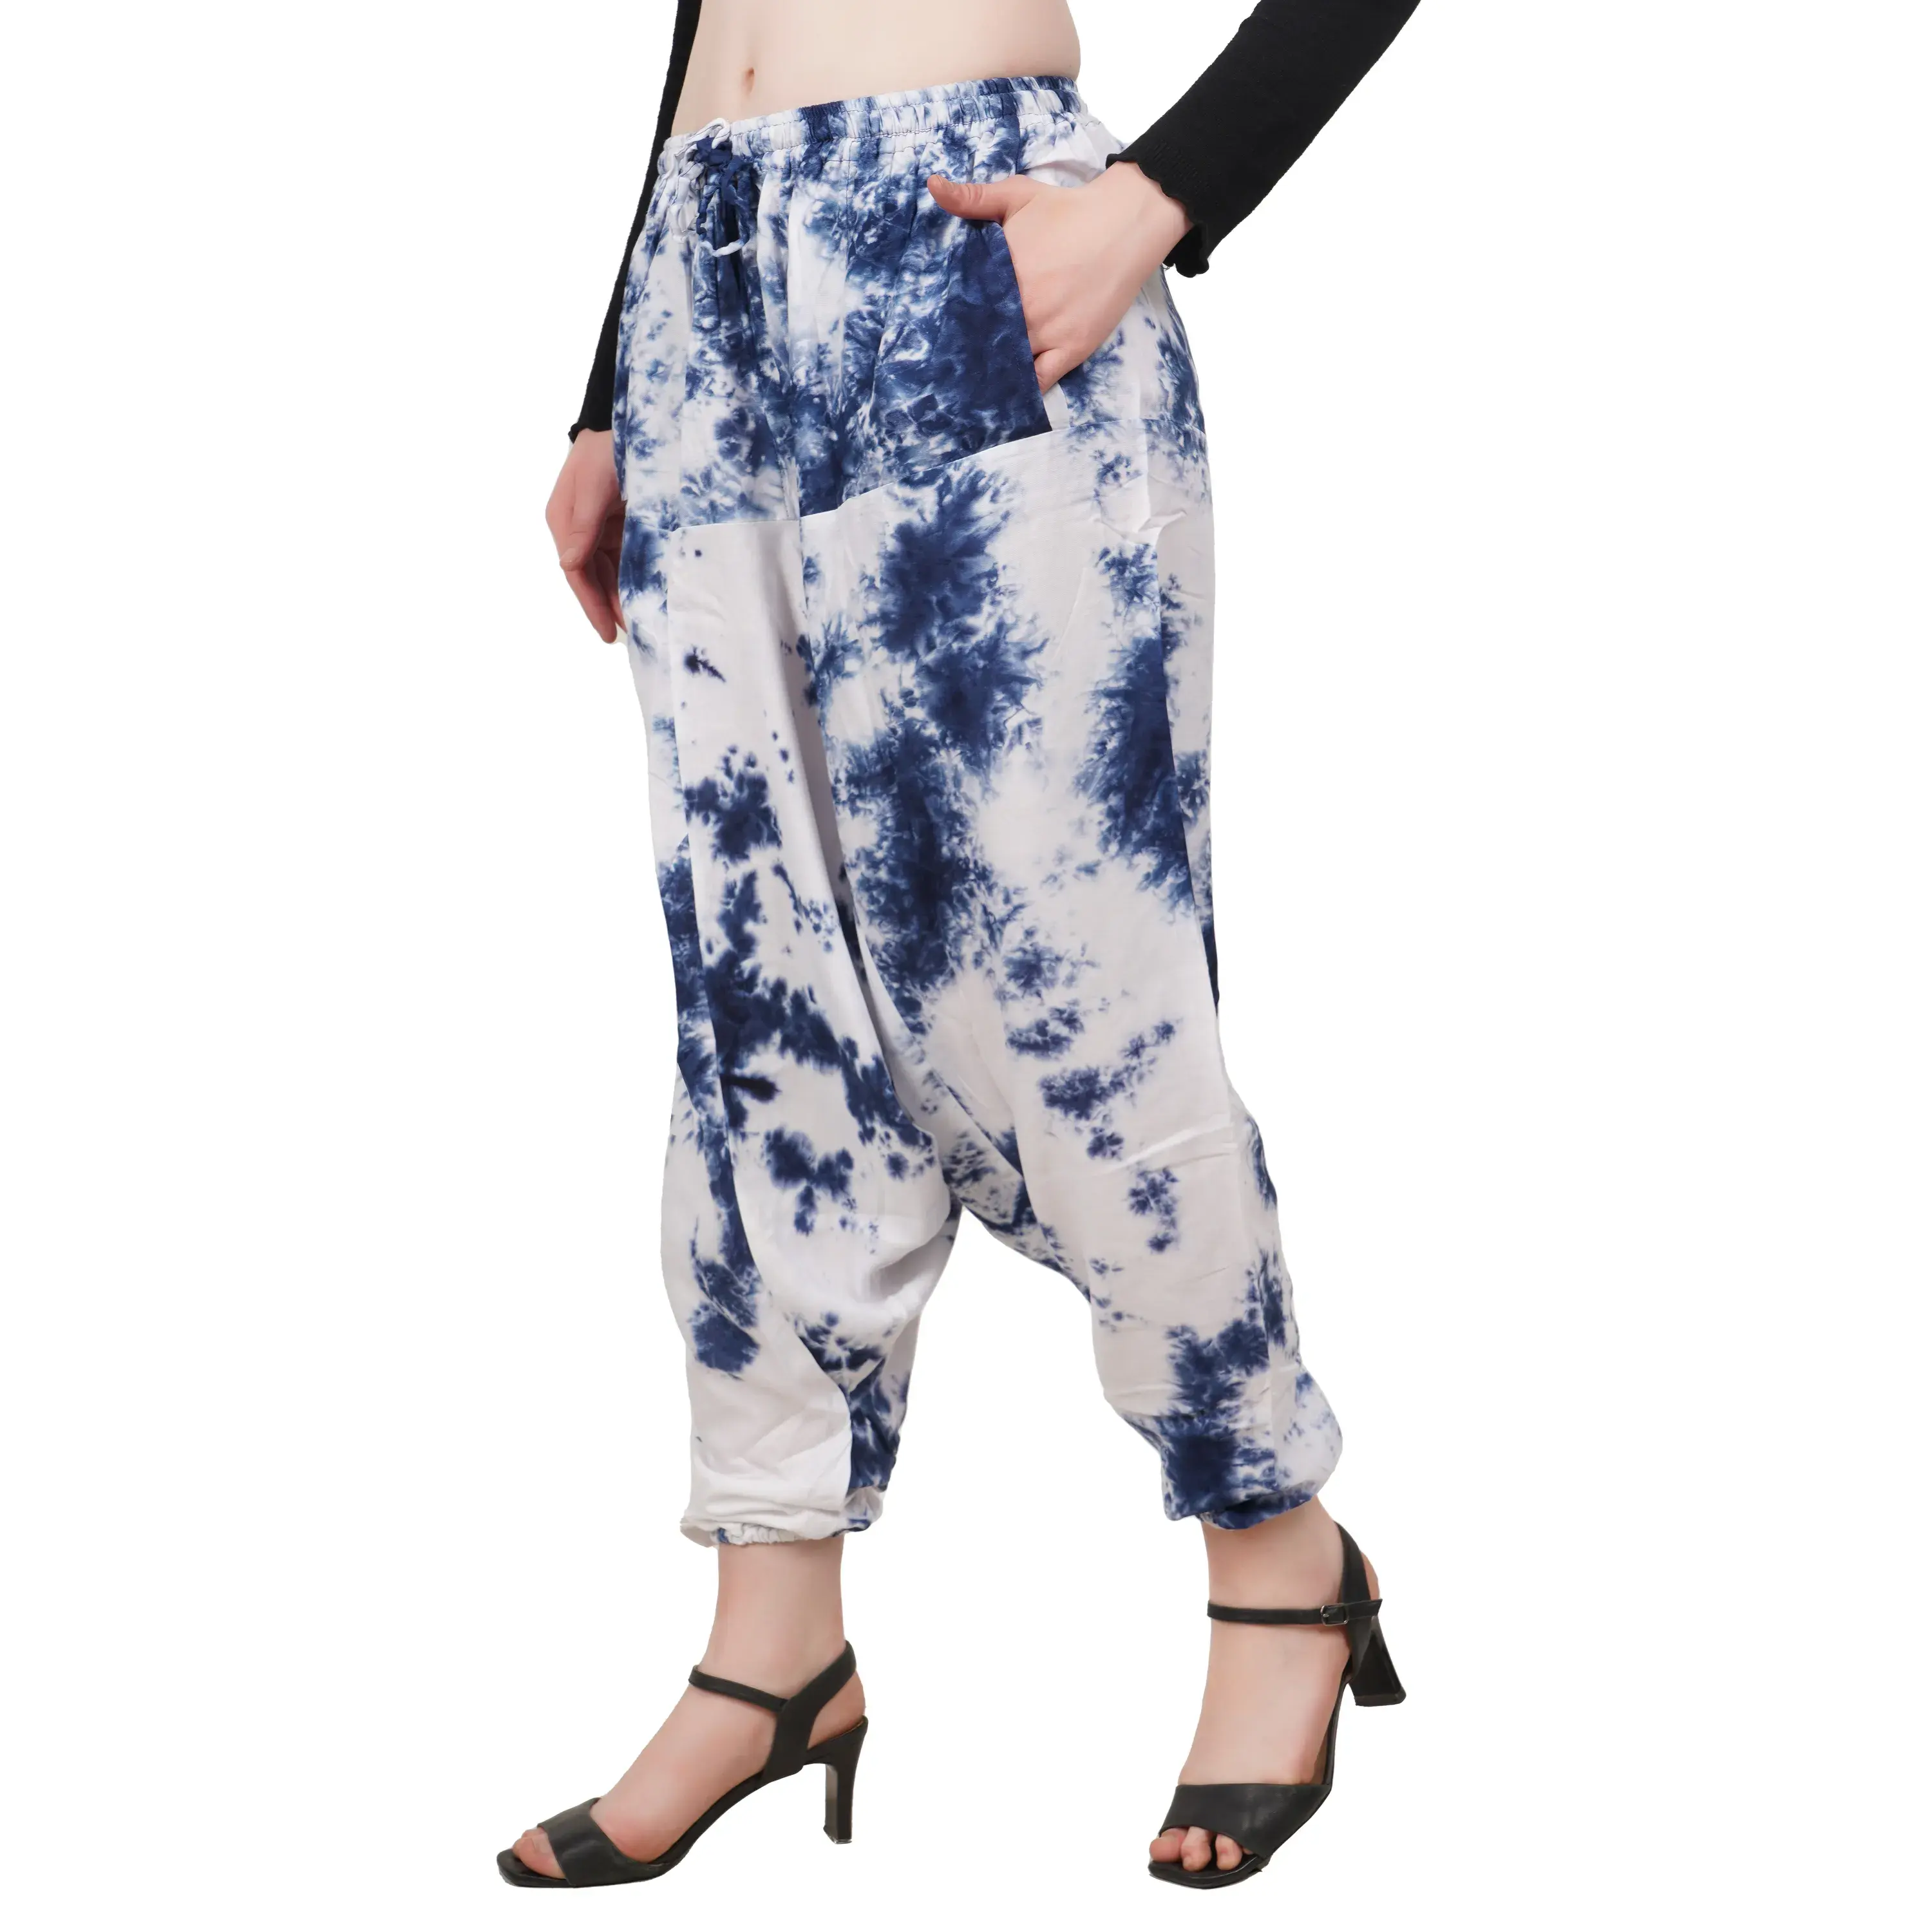 Best Quality Viscose Yoga Pants White and Blue Color Tie-Dye Trousers Pants Harem Pants with Customized Available